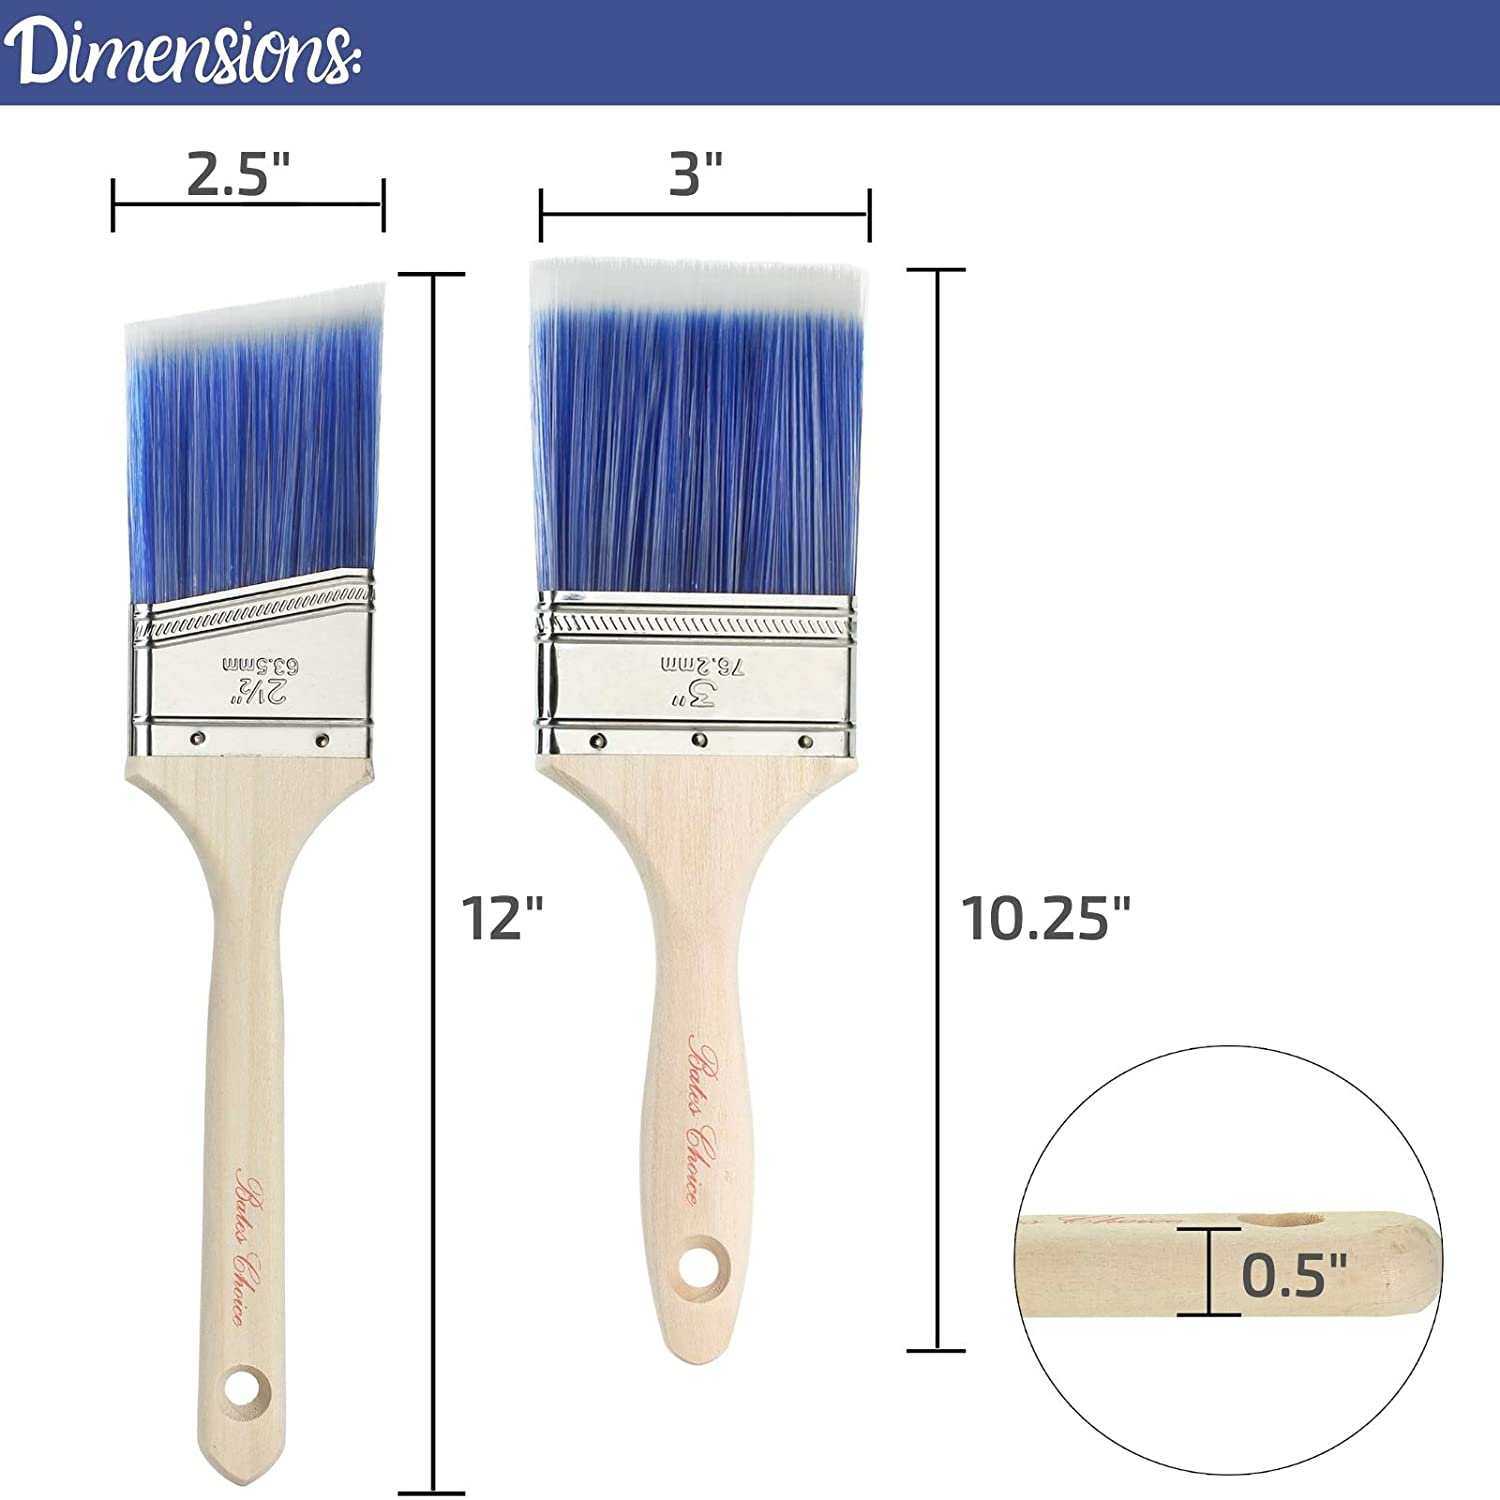 Bates- Paint Brushes, 4 Pack, Vibrant Plastic Handle, Paint Brushes for  Walls, Stain Brush, Wall Paint Brushes, Paint Brush, Furniture Paint Brush